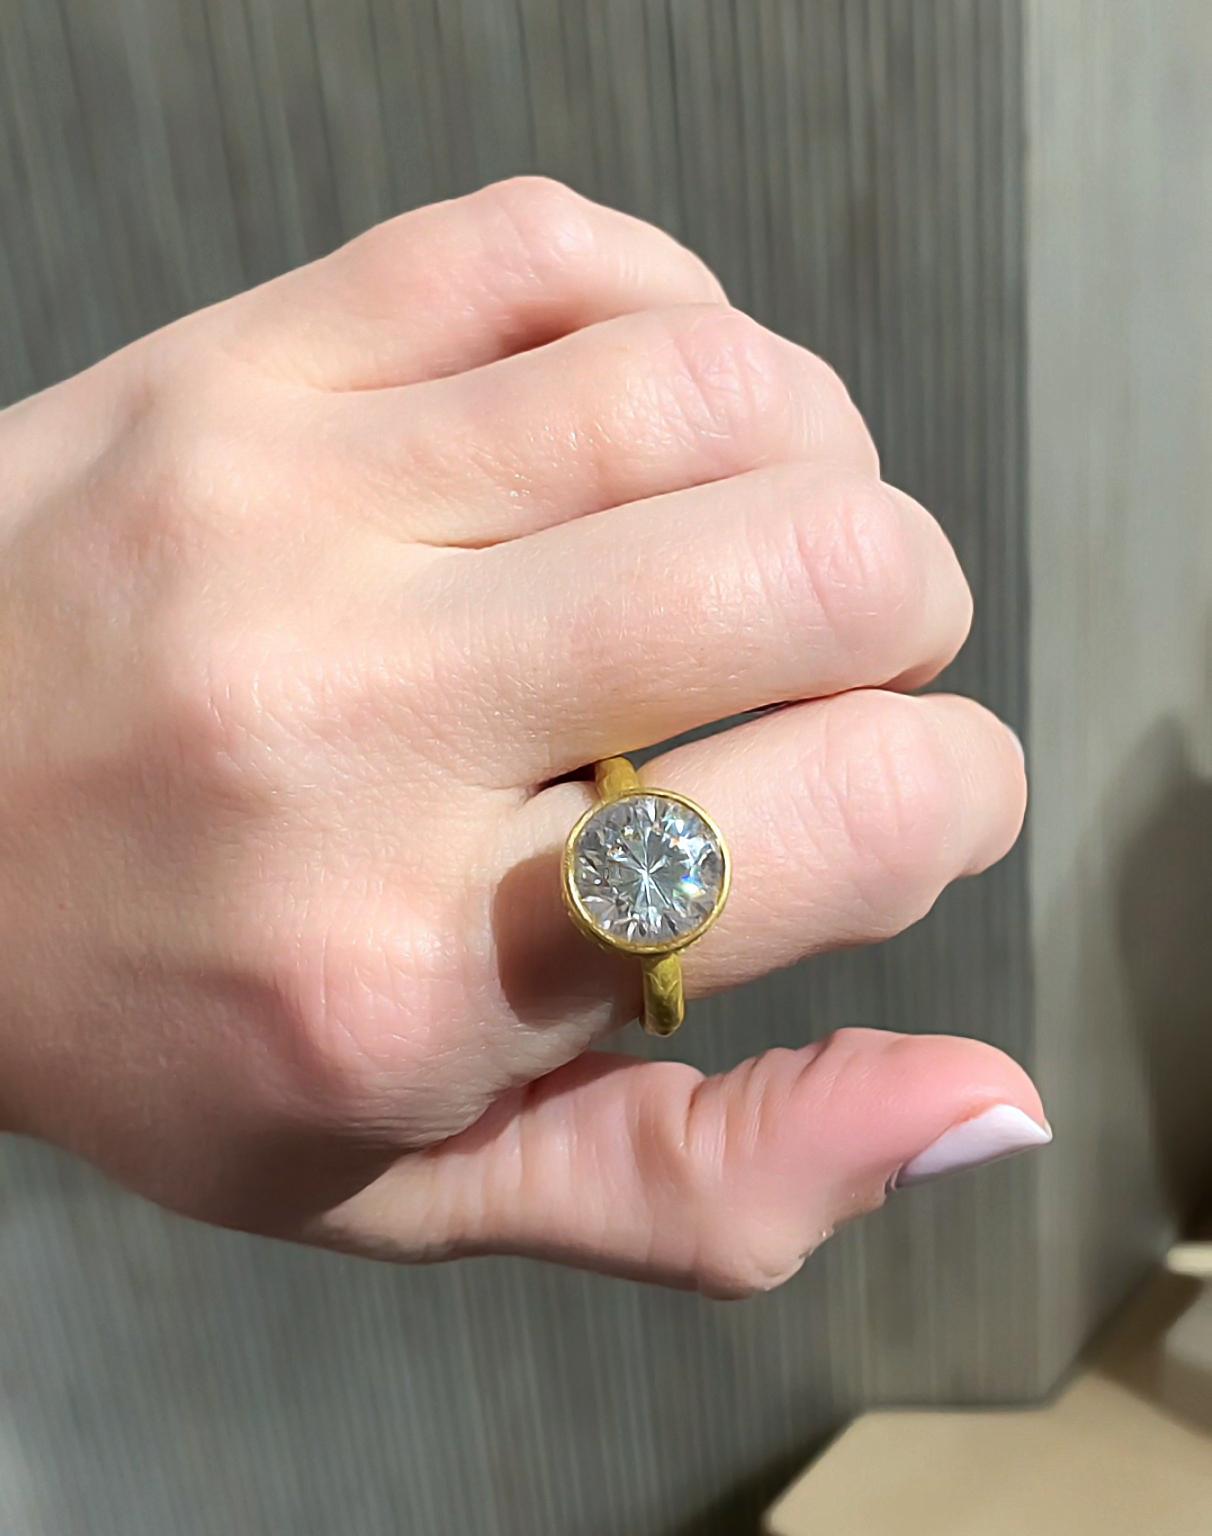 One of a Kind Ring hand-fabricated in Belgium by award-winning jewelry maker Eva Steinberg showcasing a stunning, completely natural 9.72 carat round brilliant white zircon with vivid fire and refraction, set in 21k yellow gold and embellished with